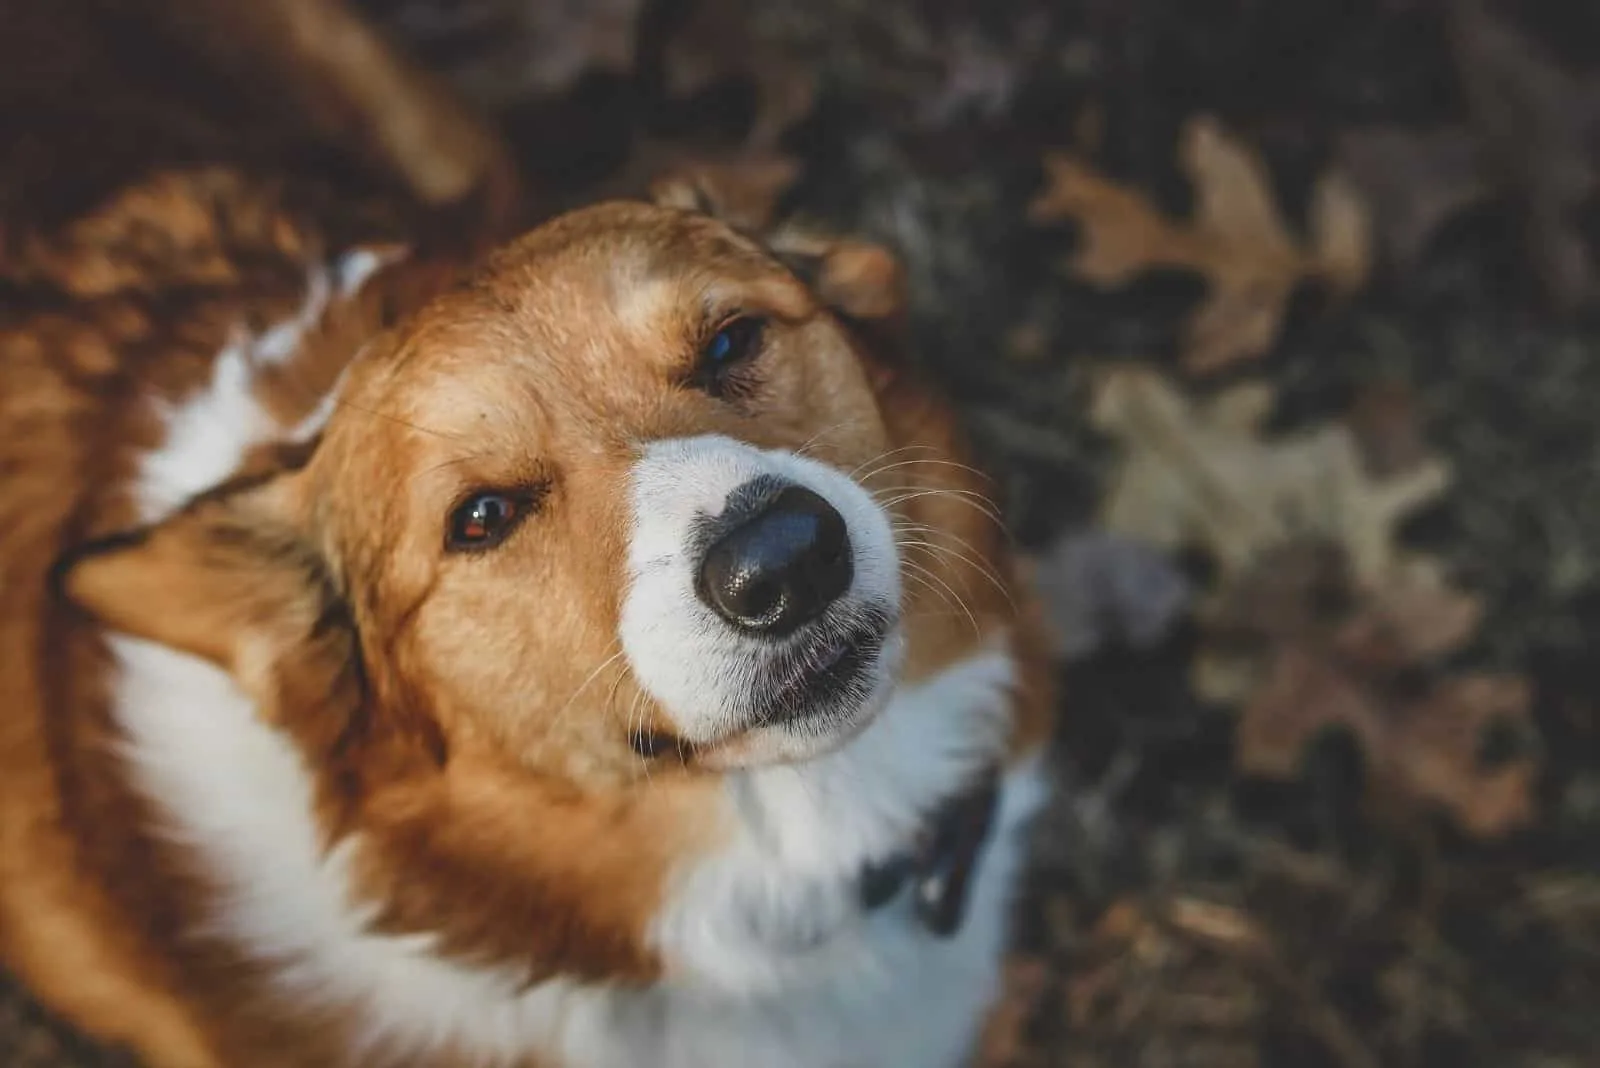 corgie named winnie looking up in focus photography in autumn forest